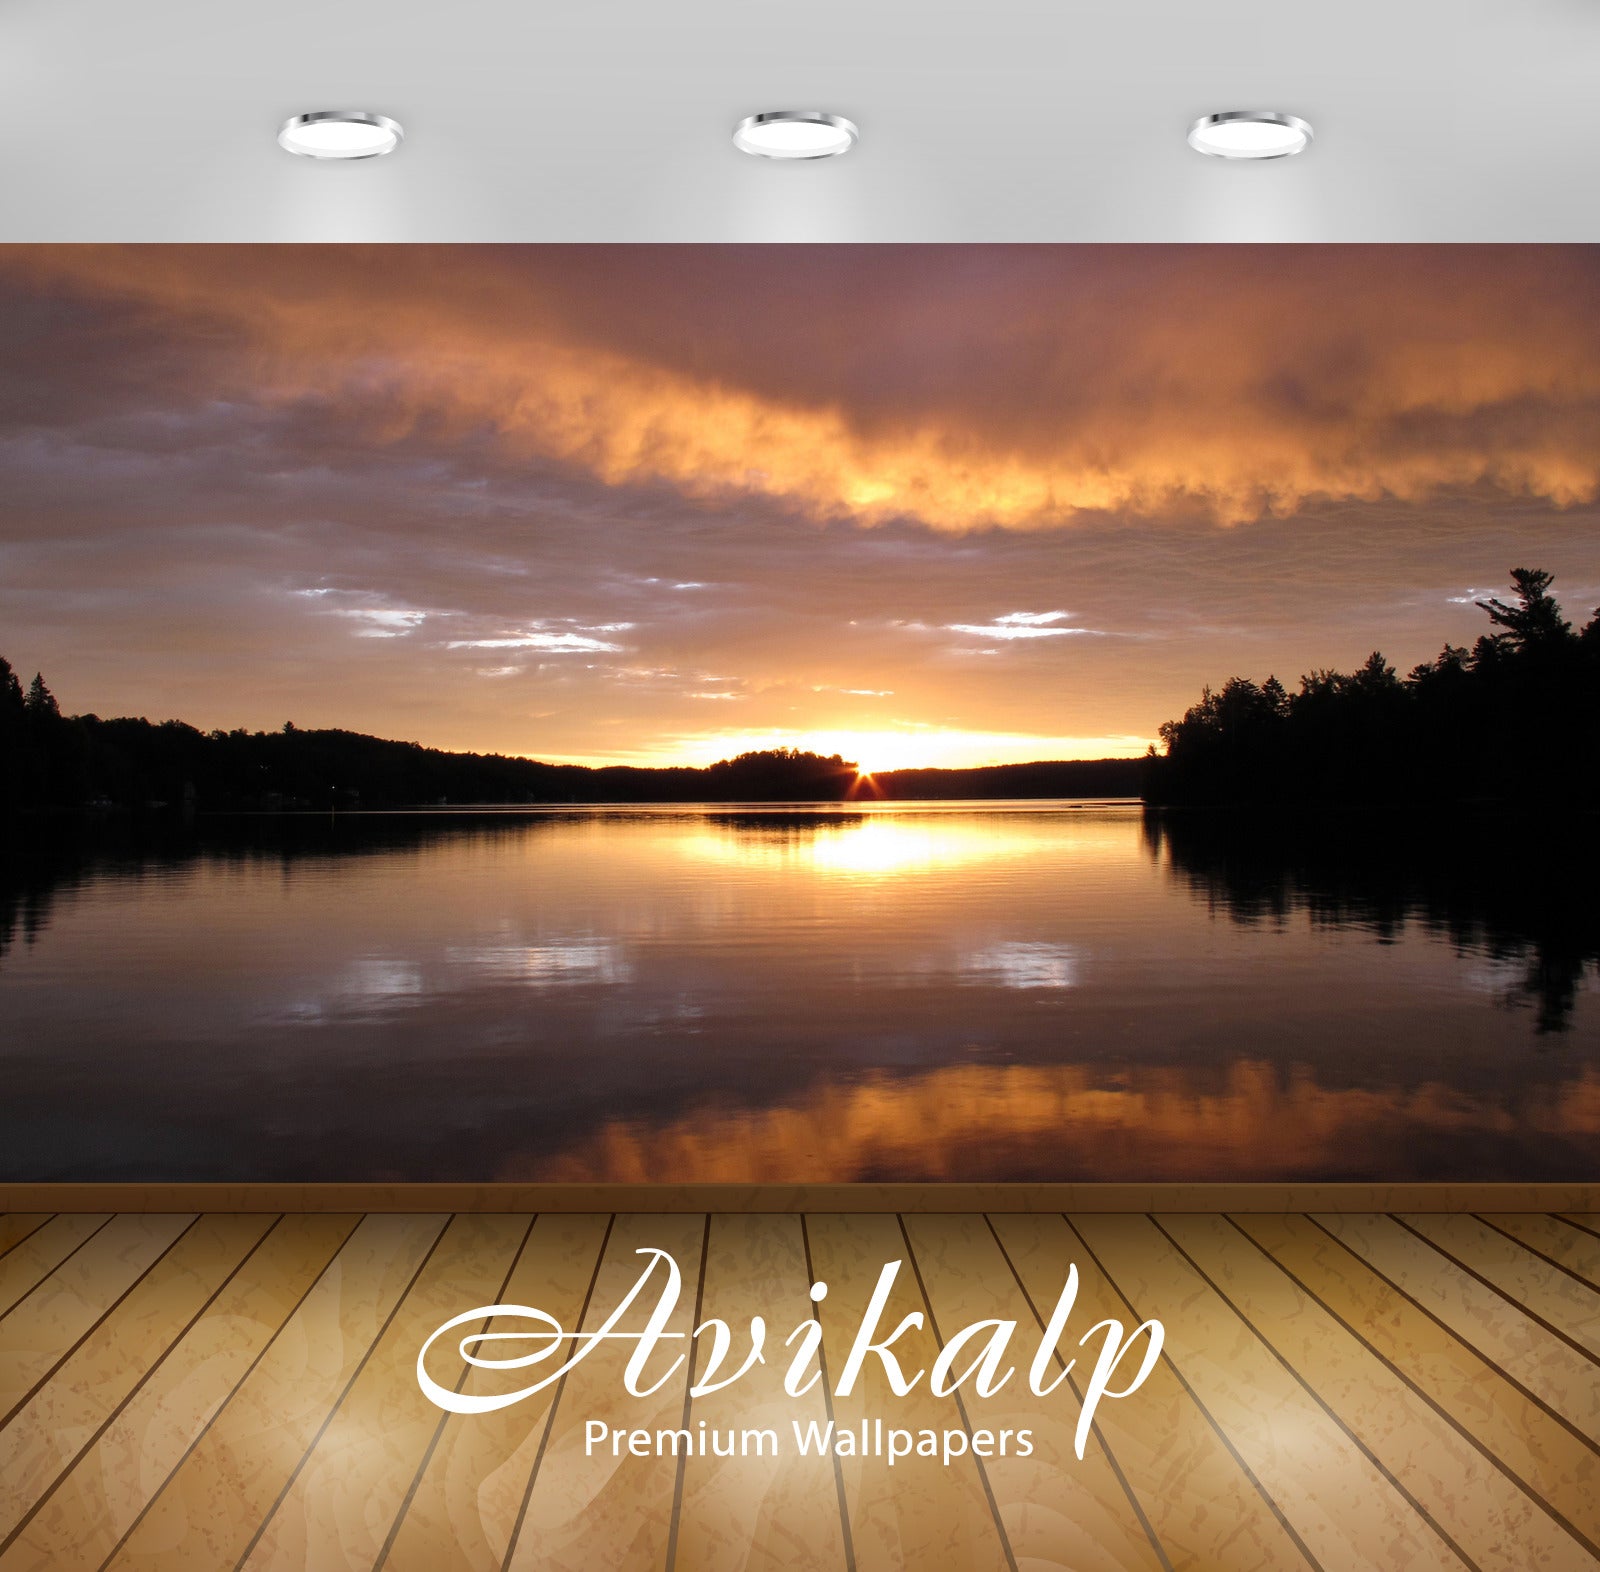 Avikalp Exclusive Awi6528 Sunset Reflecting In The Lake Nature Full HD Wallpapers for Living room, H